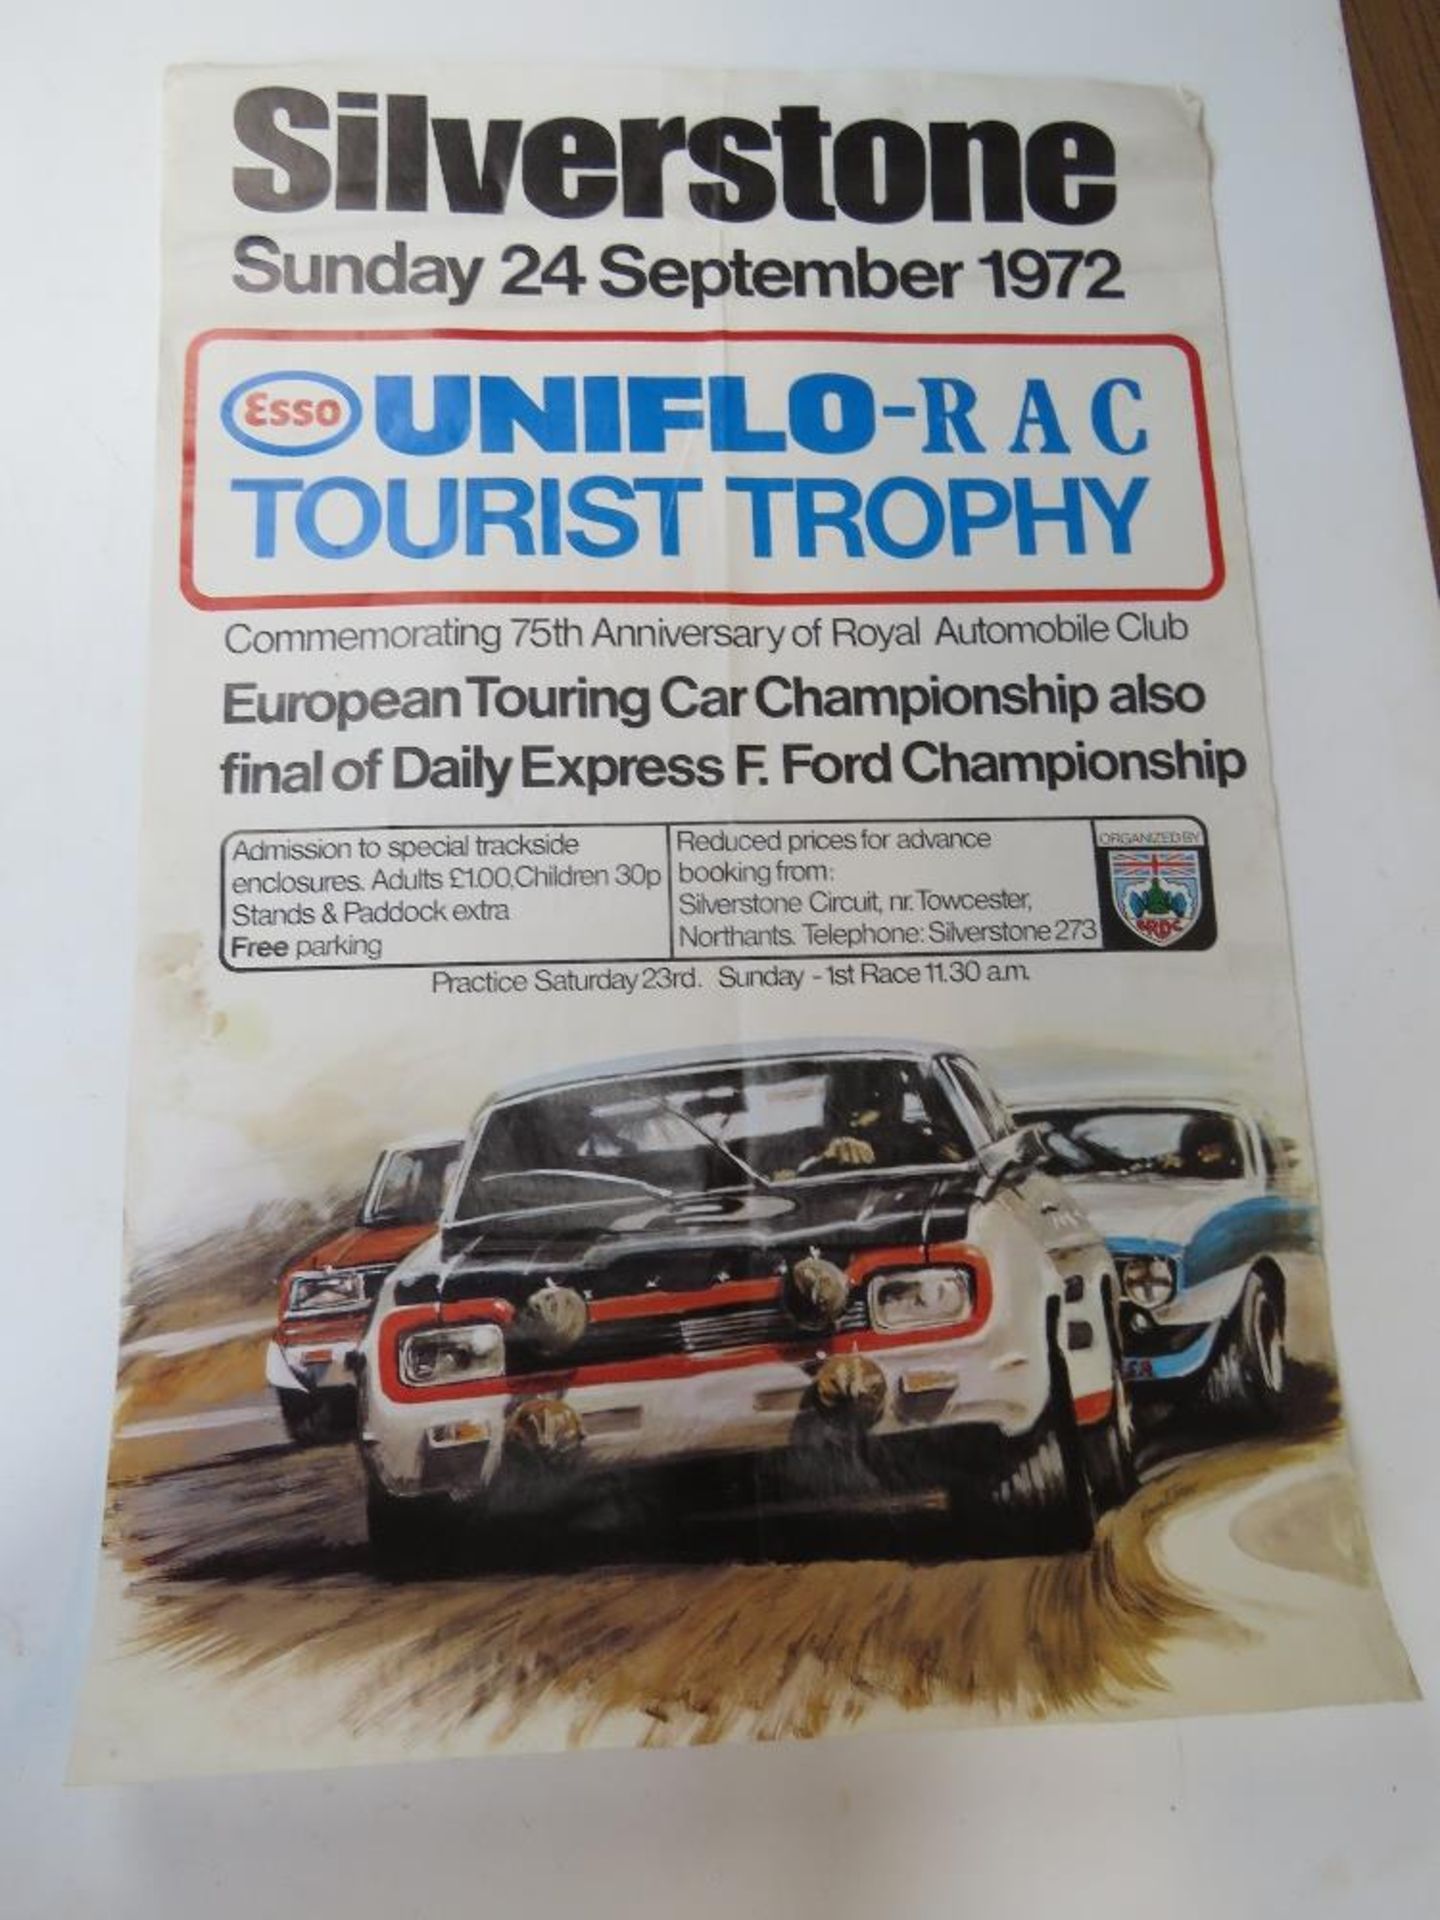 An original Silverstone 1972 poster for